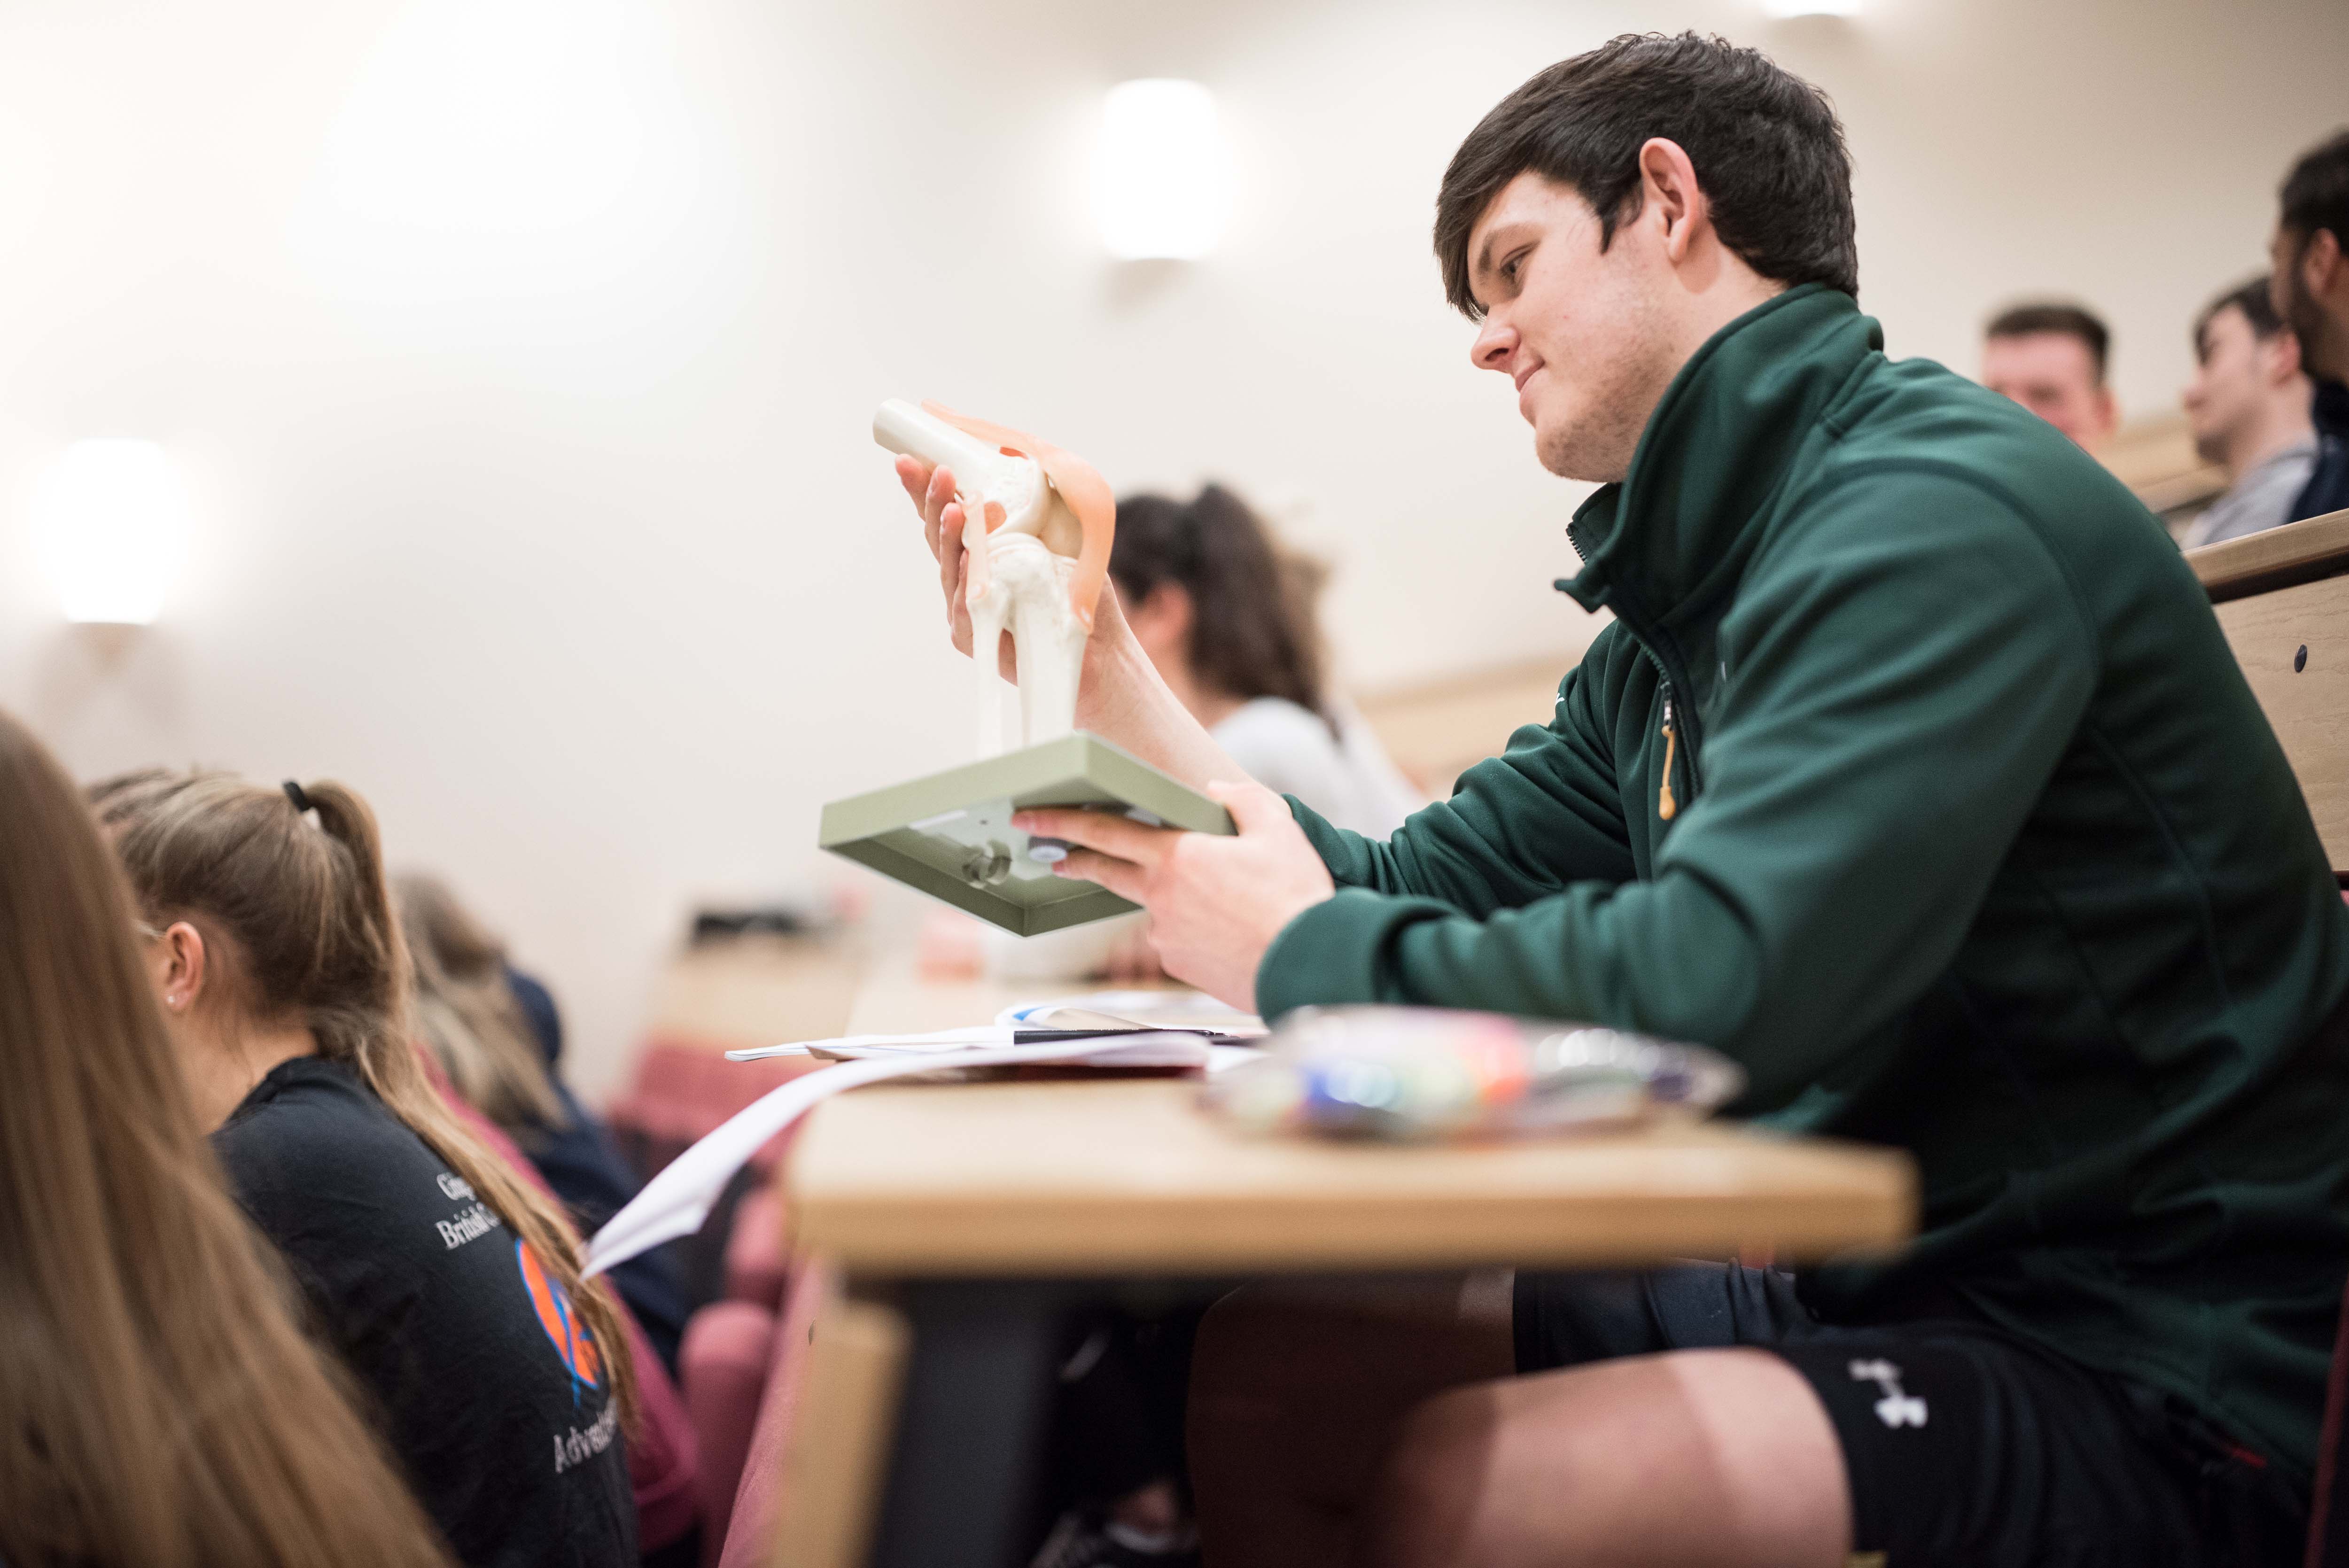 Student in a lecture examine a model of the knee